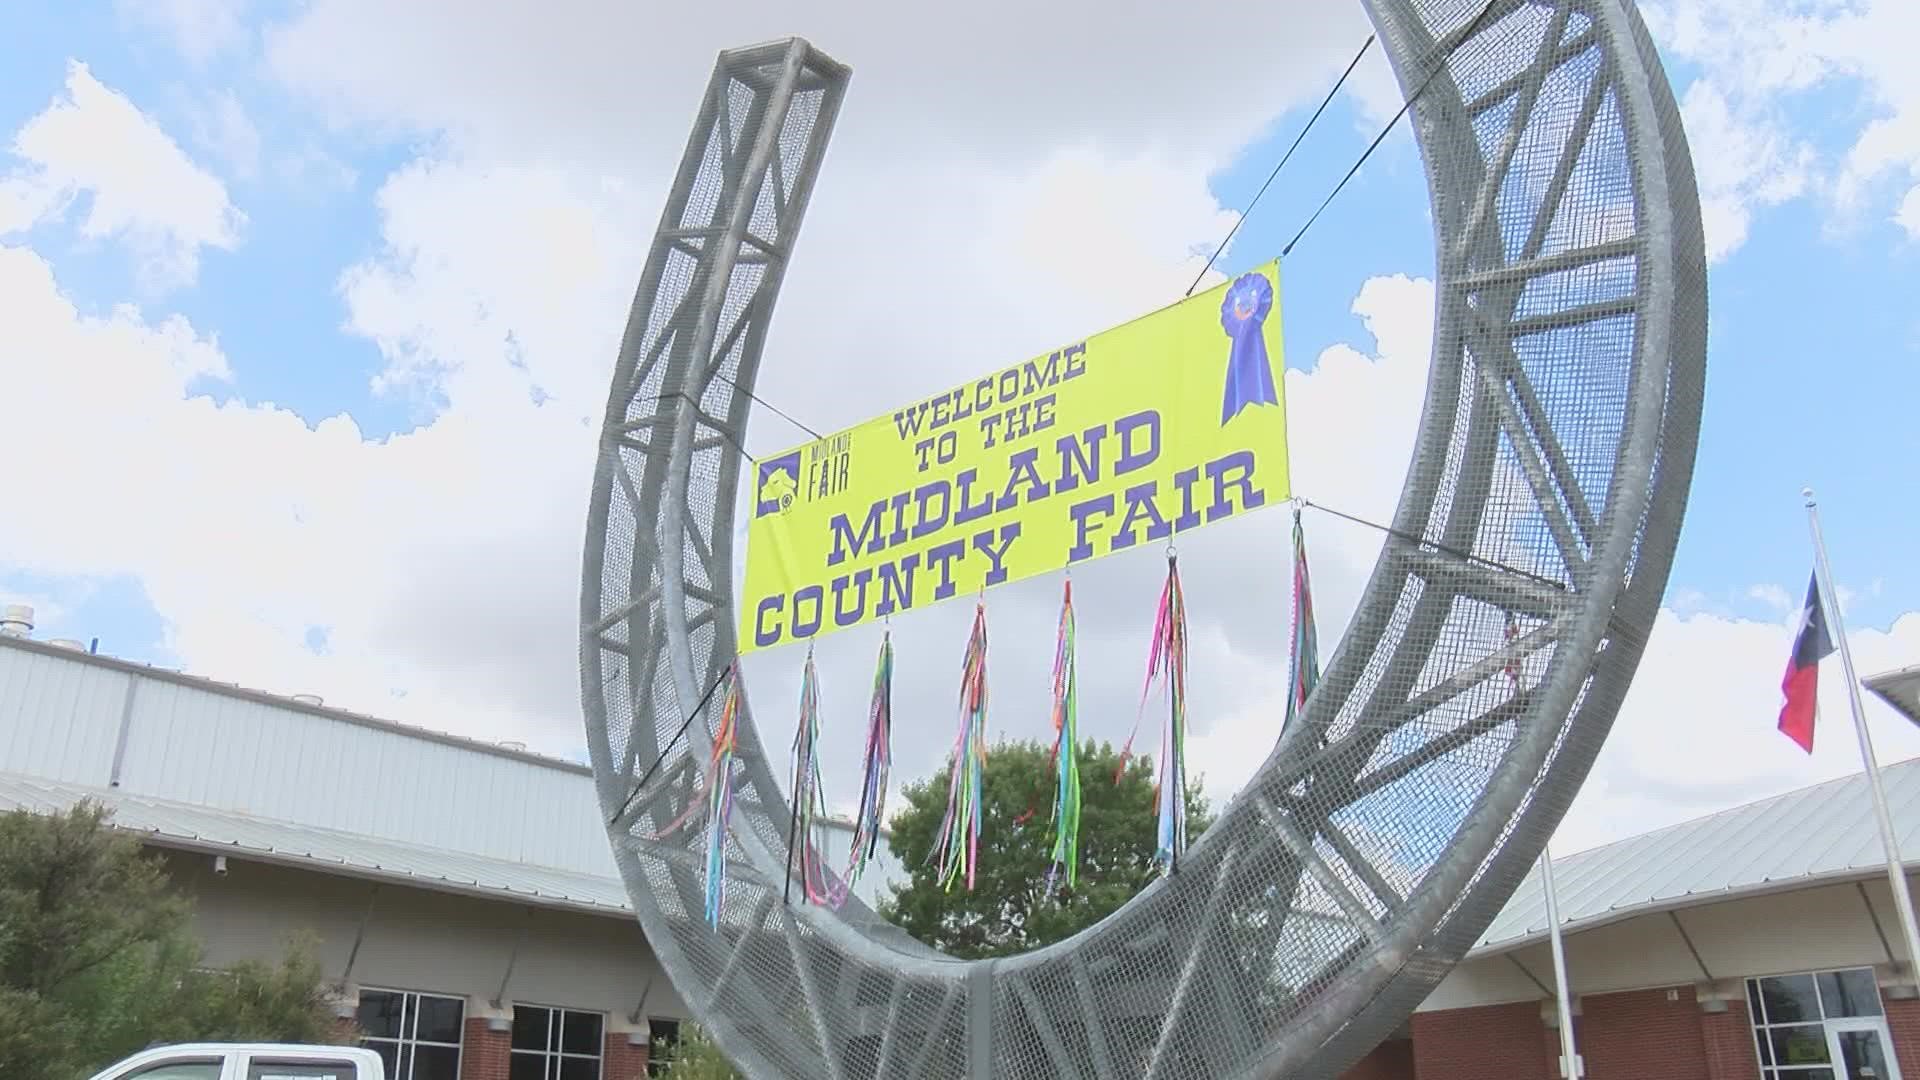 The fair will be kicking off its 13th annual year on Aug. 25.